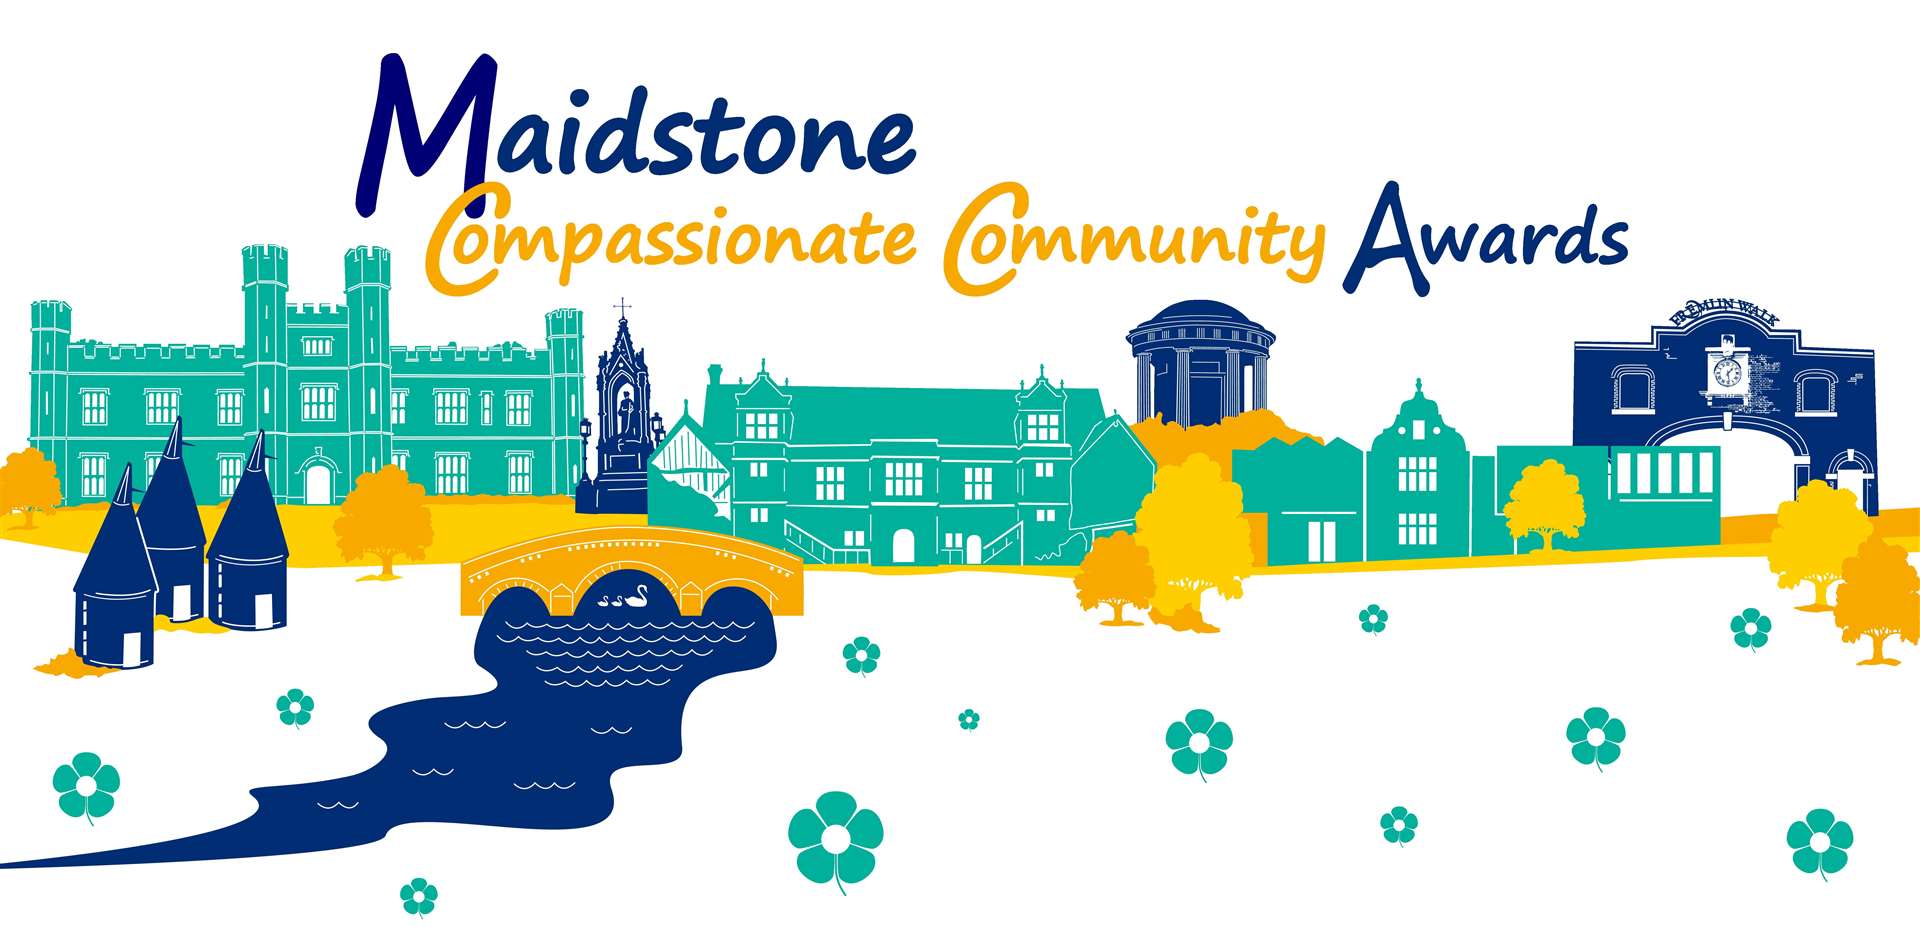 Maidstone Borough Council and The Heart of Kent Hospice have launched the Compassionate Community Awards 2020